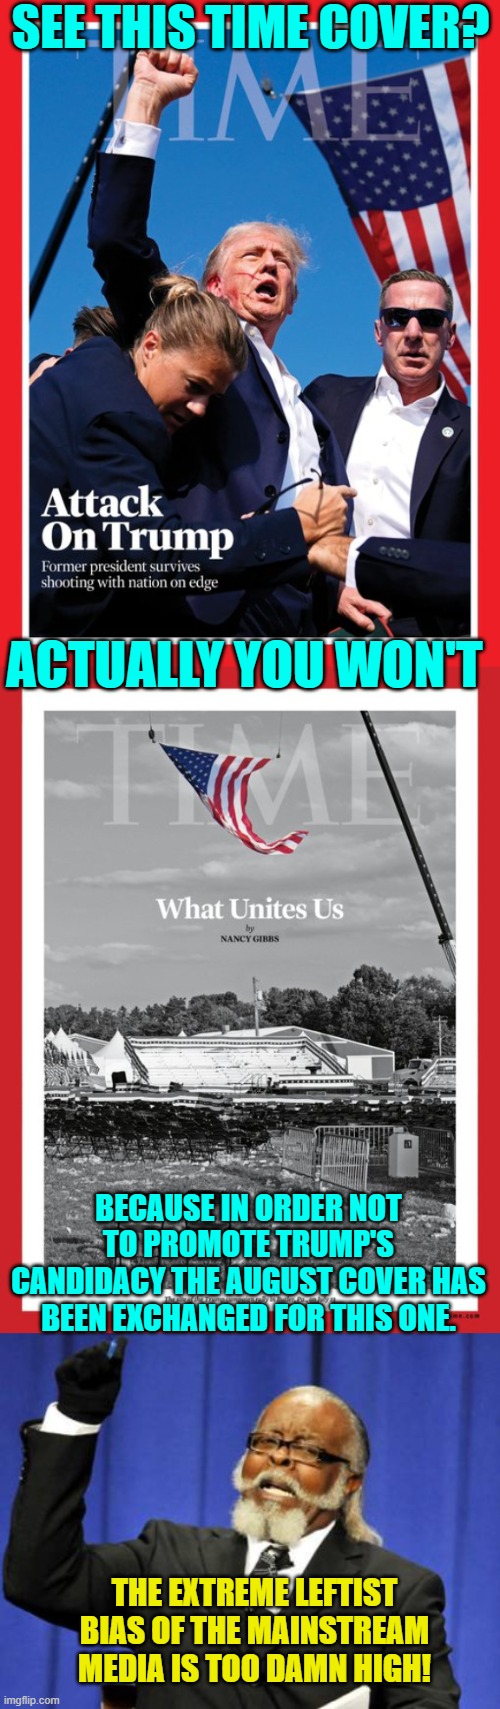 Leftist get a warm and fuzzy feeling from being blatantly manipulated.  It's a Dem Party thing. | SEE THIS TIME COVER? ACTUALLY YOU WON'T; BECAUSE IN ORDER NOT TO PROMOTE TRUMP'S CANDIDACY THE AUGUST COVER HAS BEEN EXCHANGED FOR THIS ONE. THE EXTREME LEFTIST BIAS OF THE MAINSTREAM MEDIA IS TOO DAMN HIGH! | image tagged in yep | made w/ Imgflip meme maker